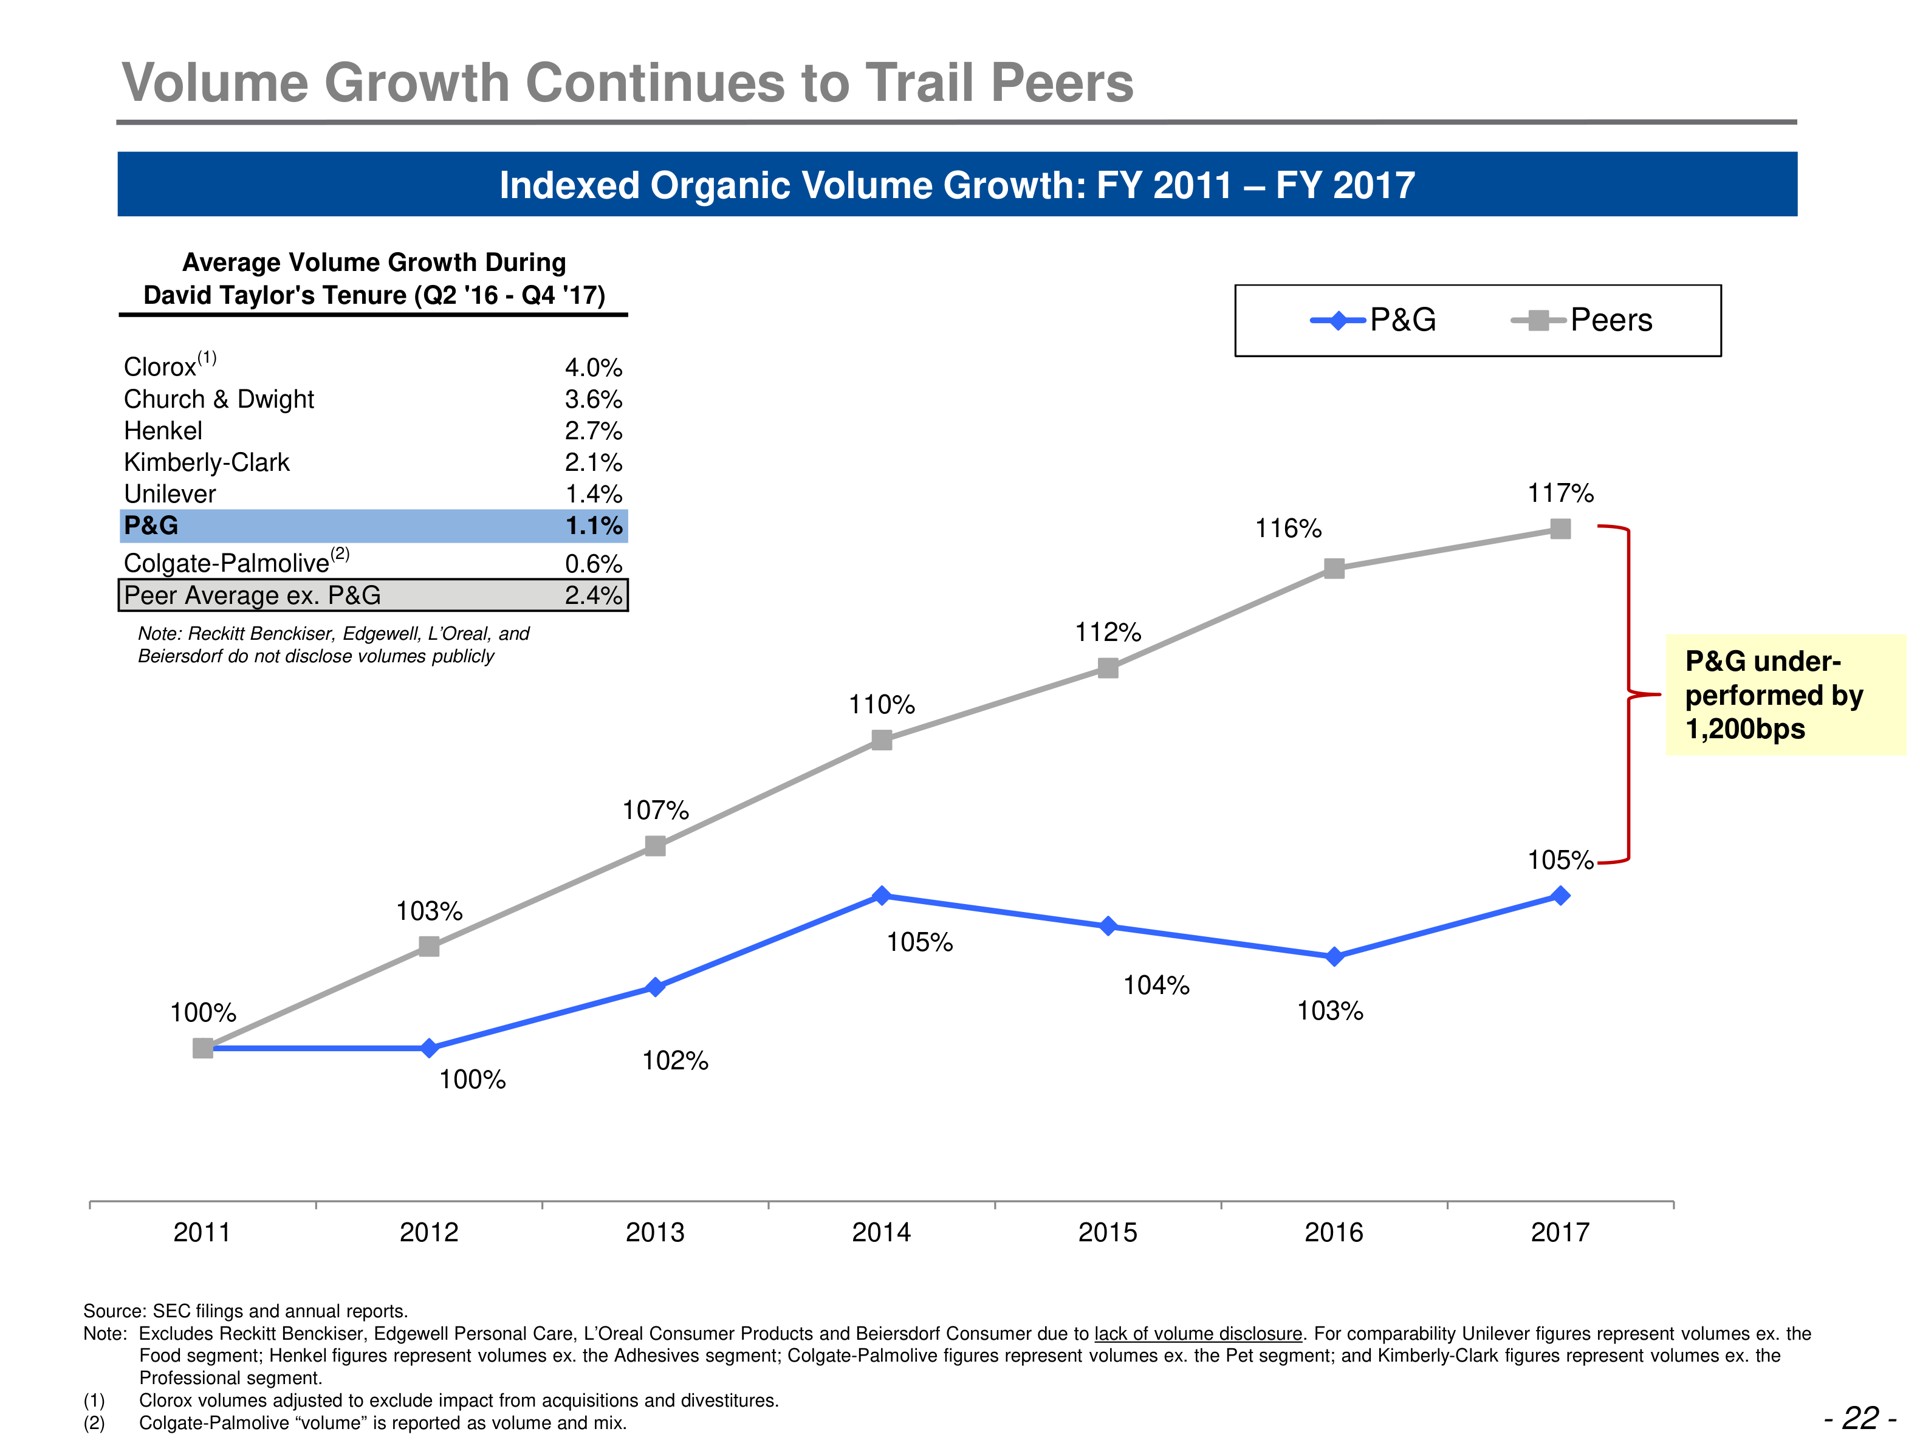 volume growth continues to trail peers | Trian Partners